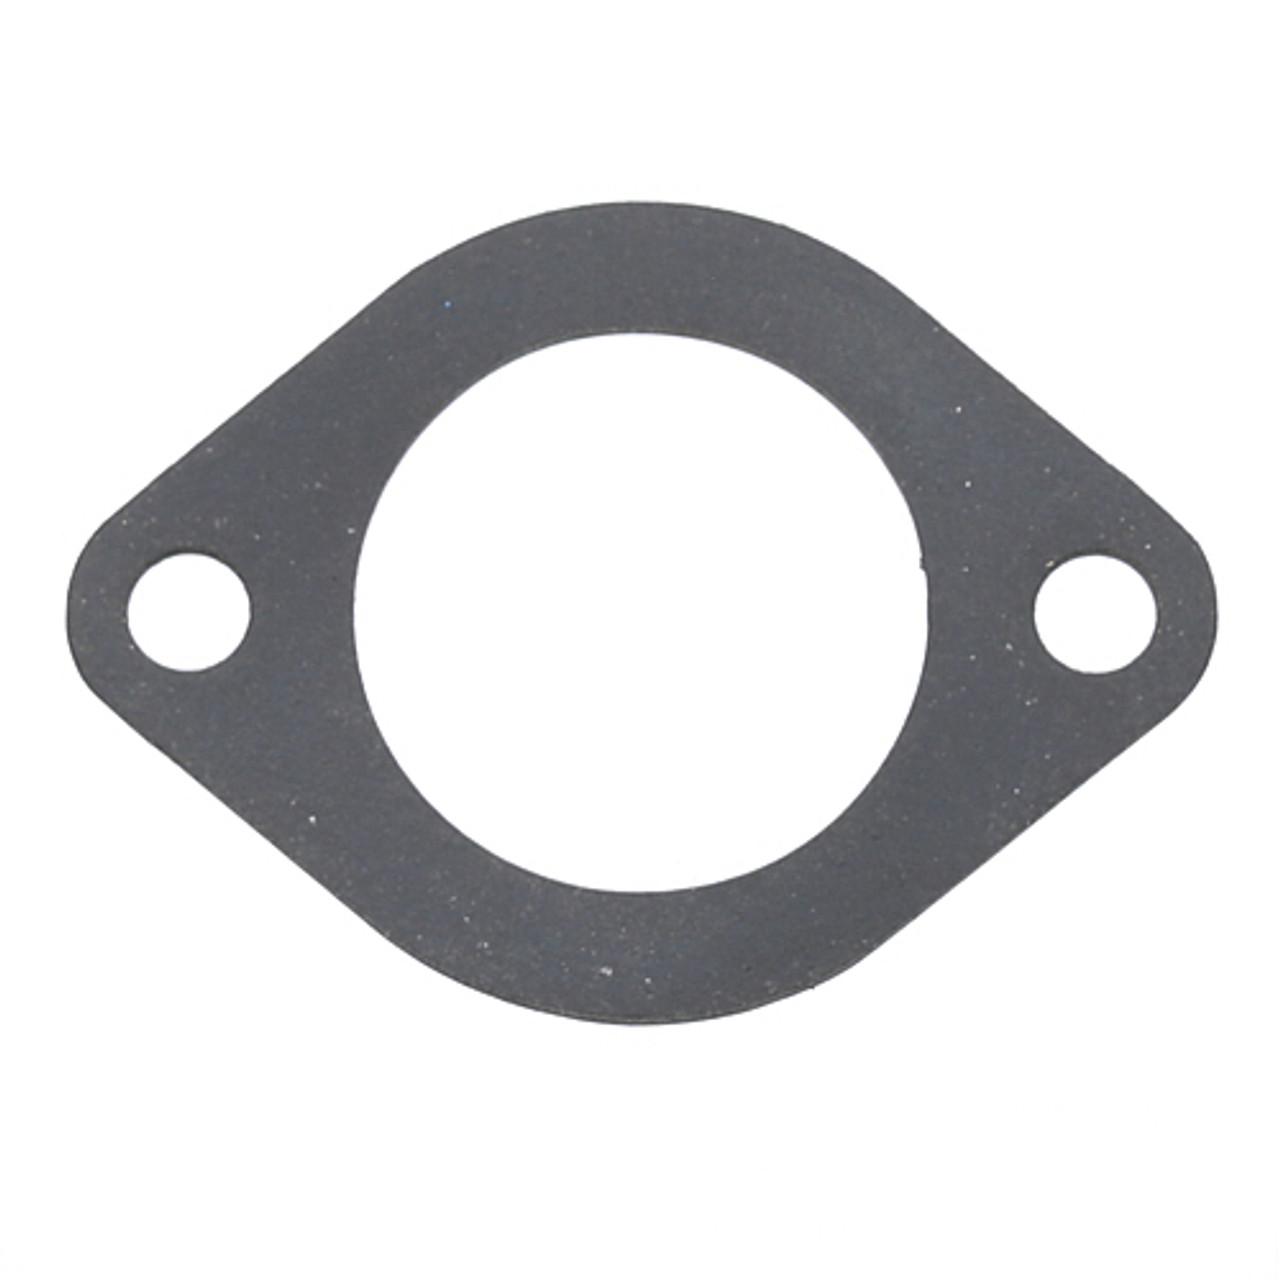 Gasket, Heater Mounting - Replacement Part For Hobart 293598